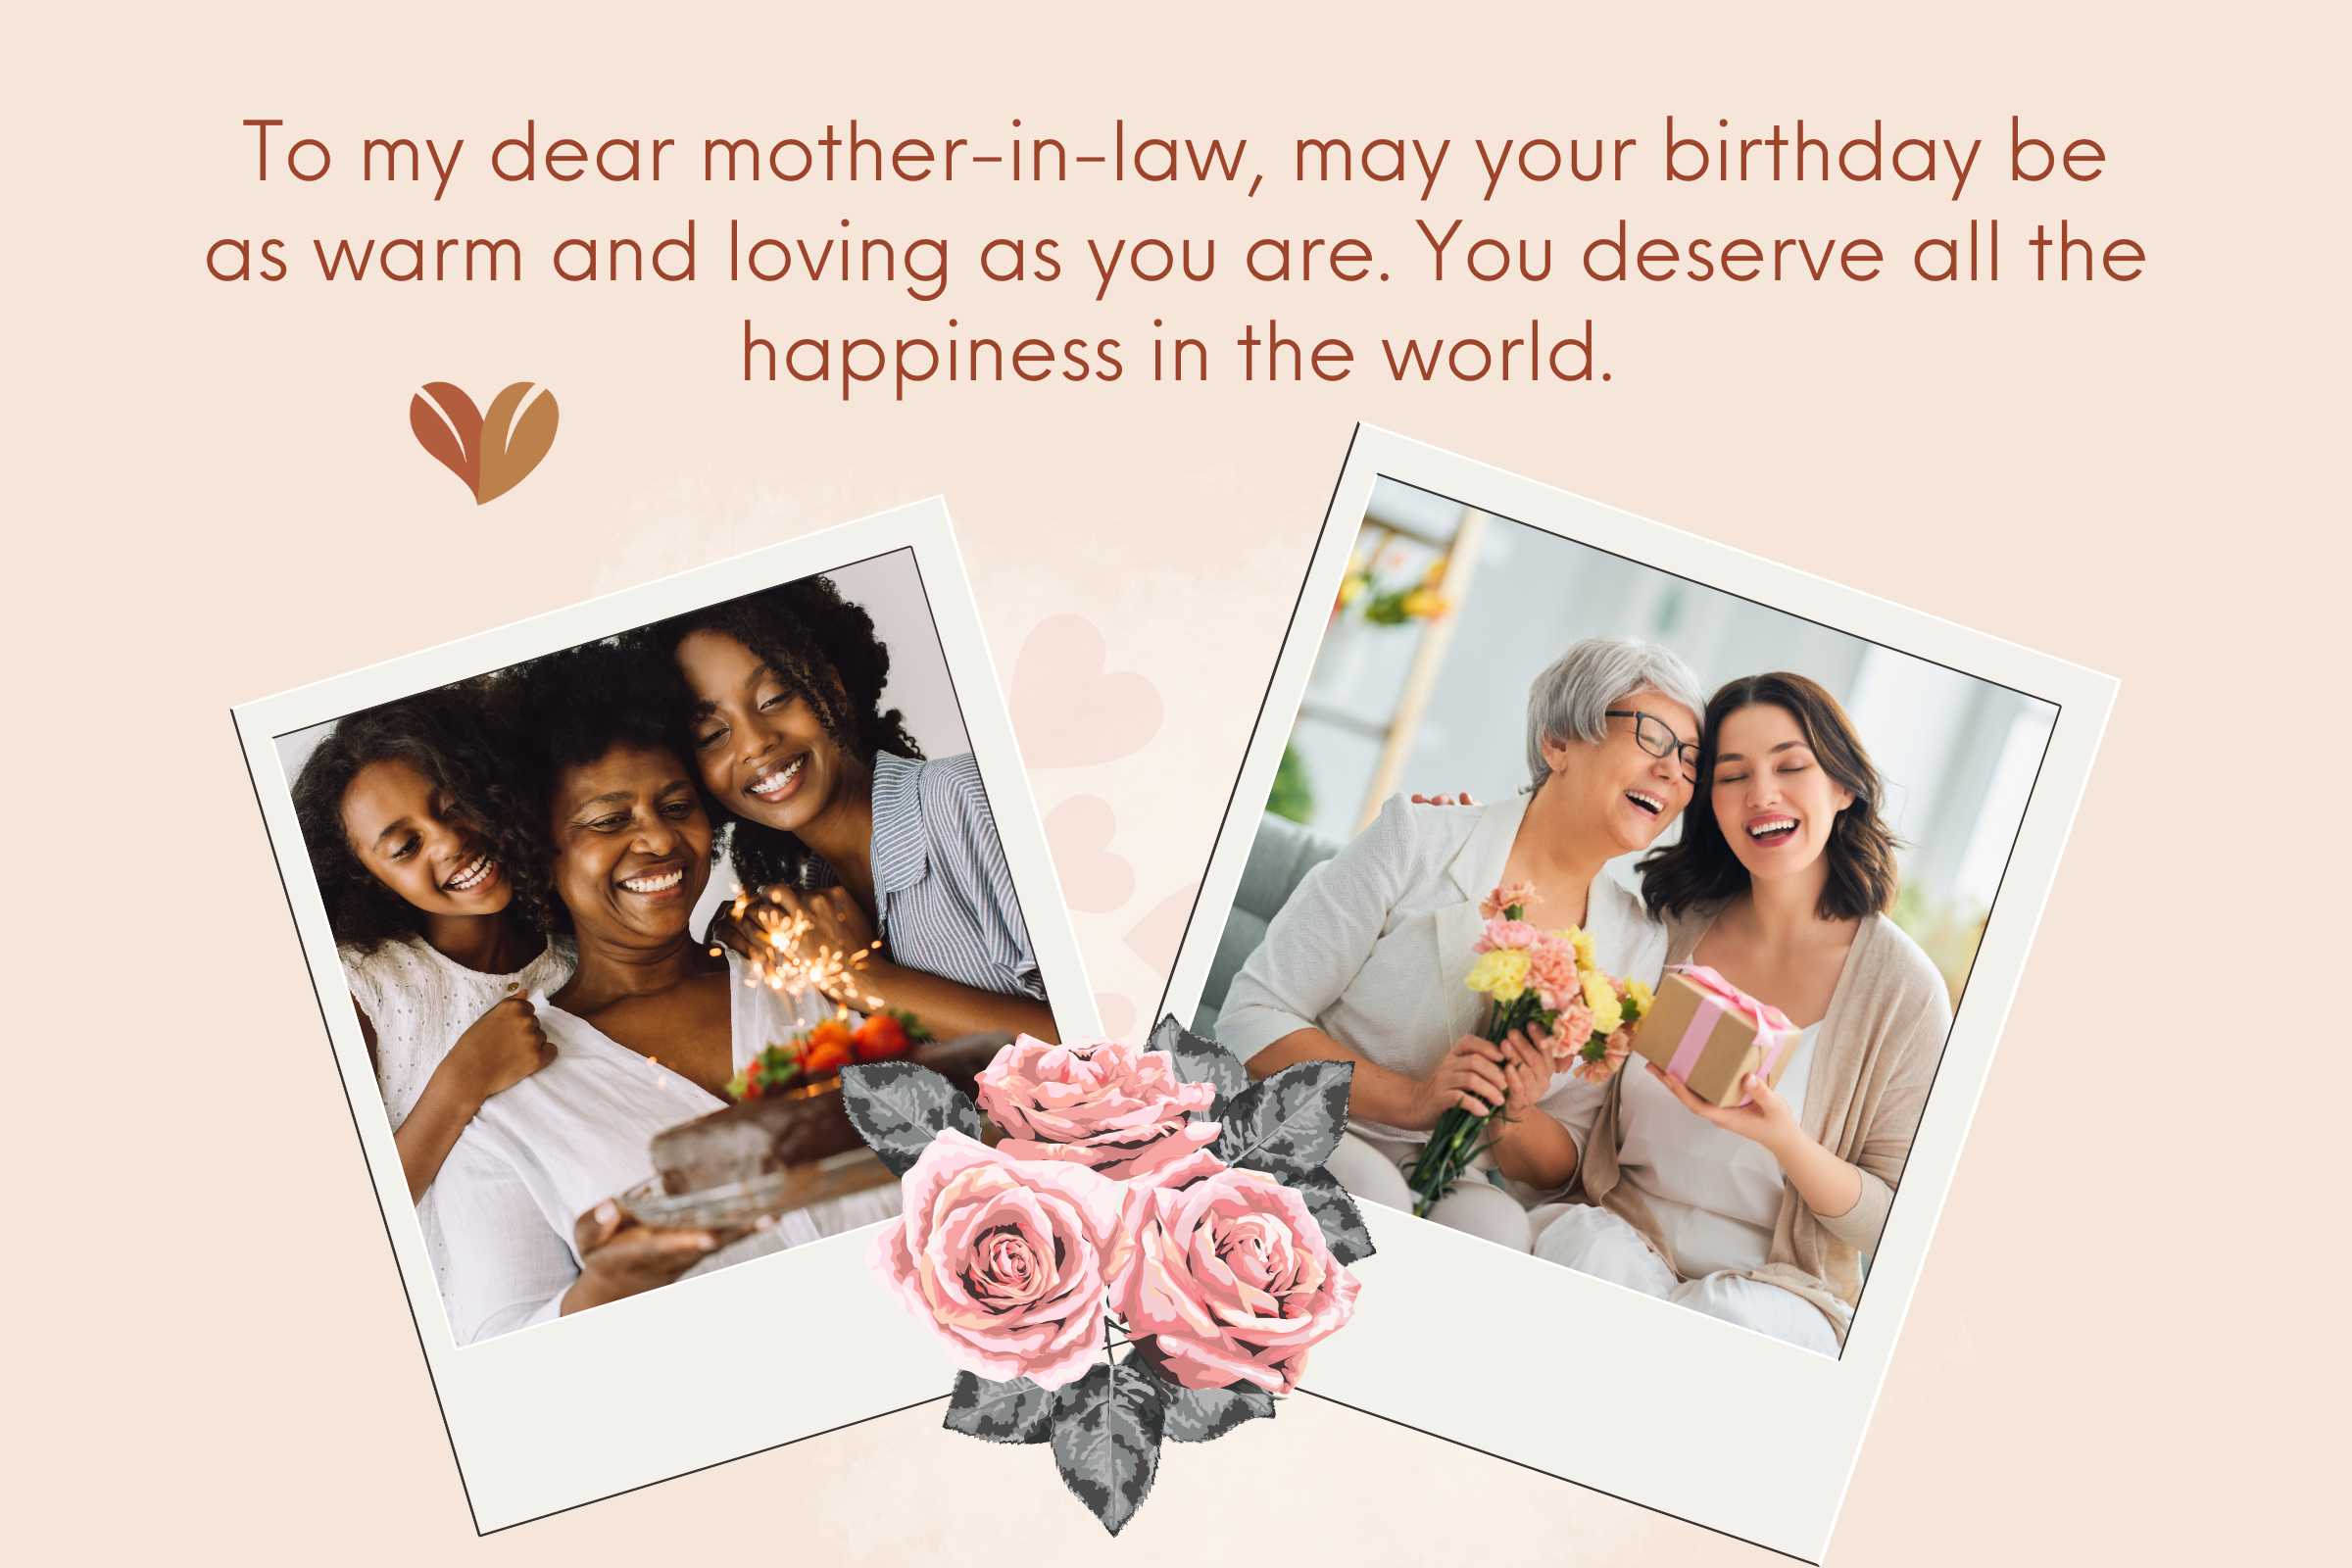 May your special day be filled with love and joy - Birthday quotes for mother-in-law